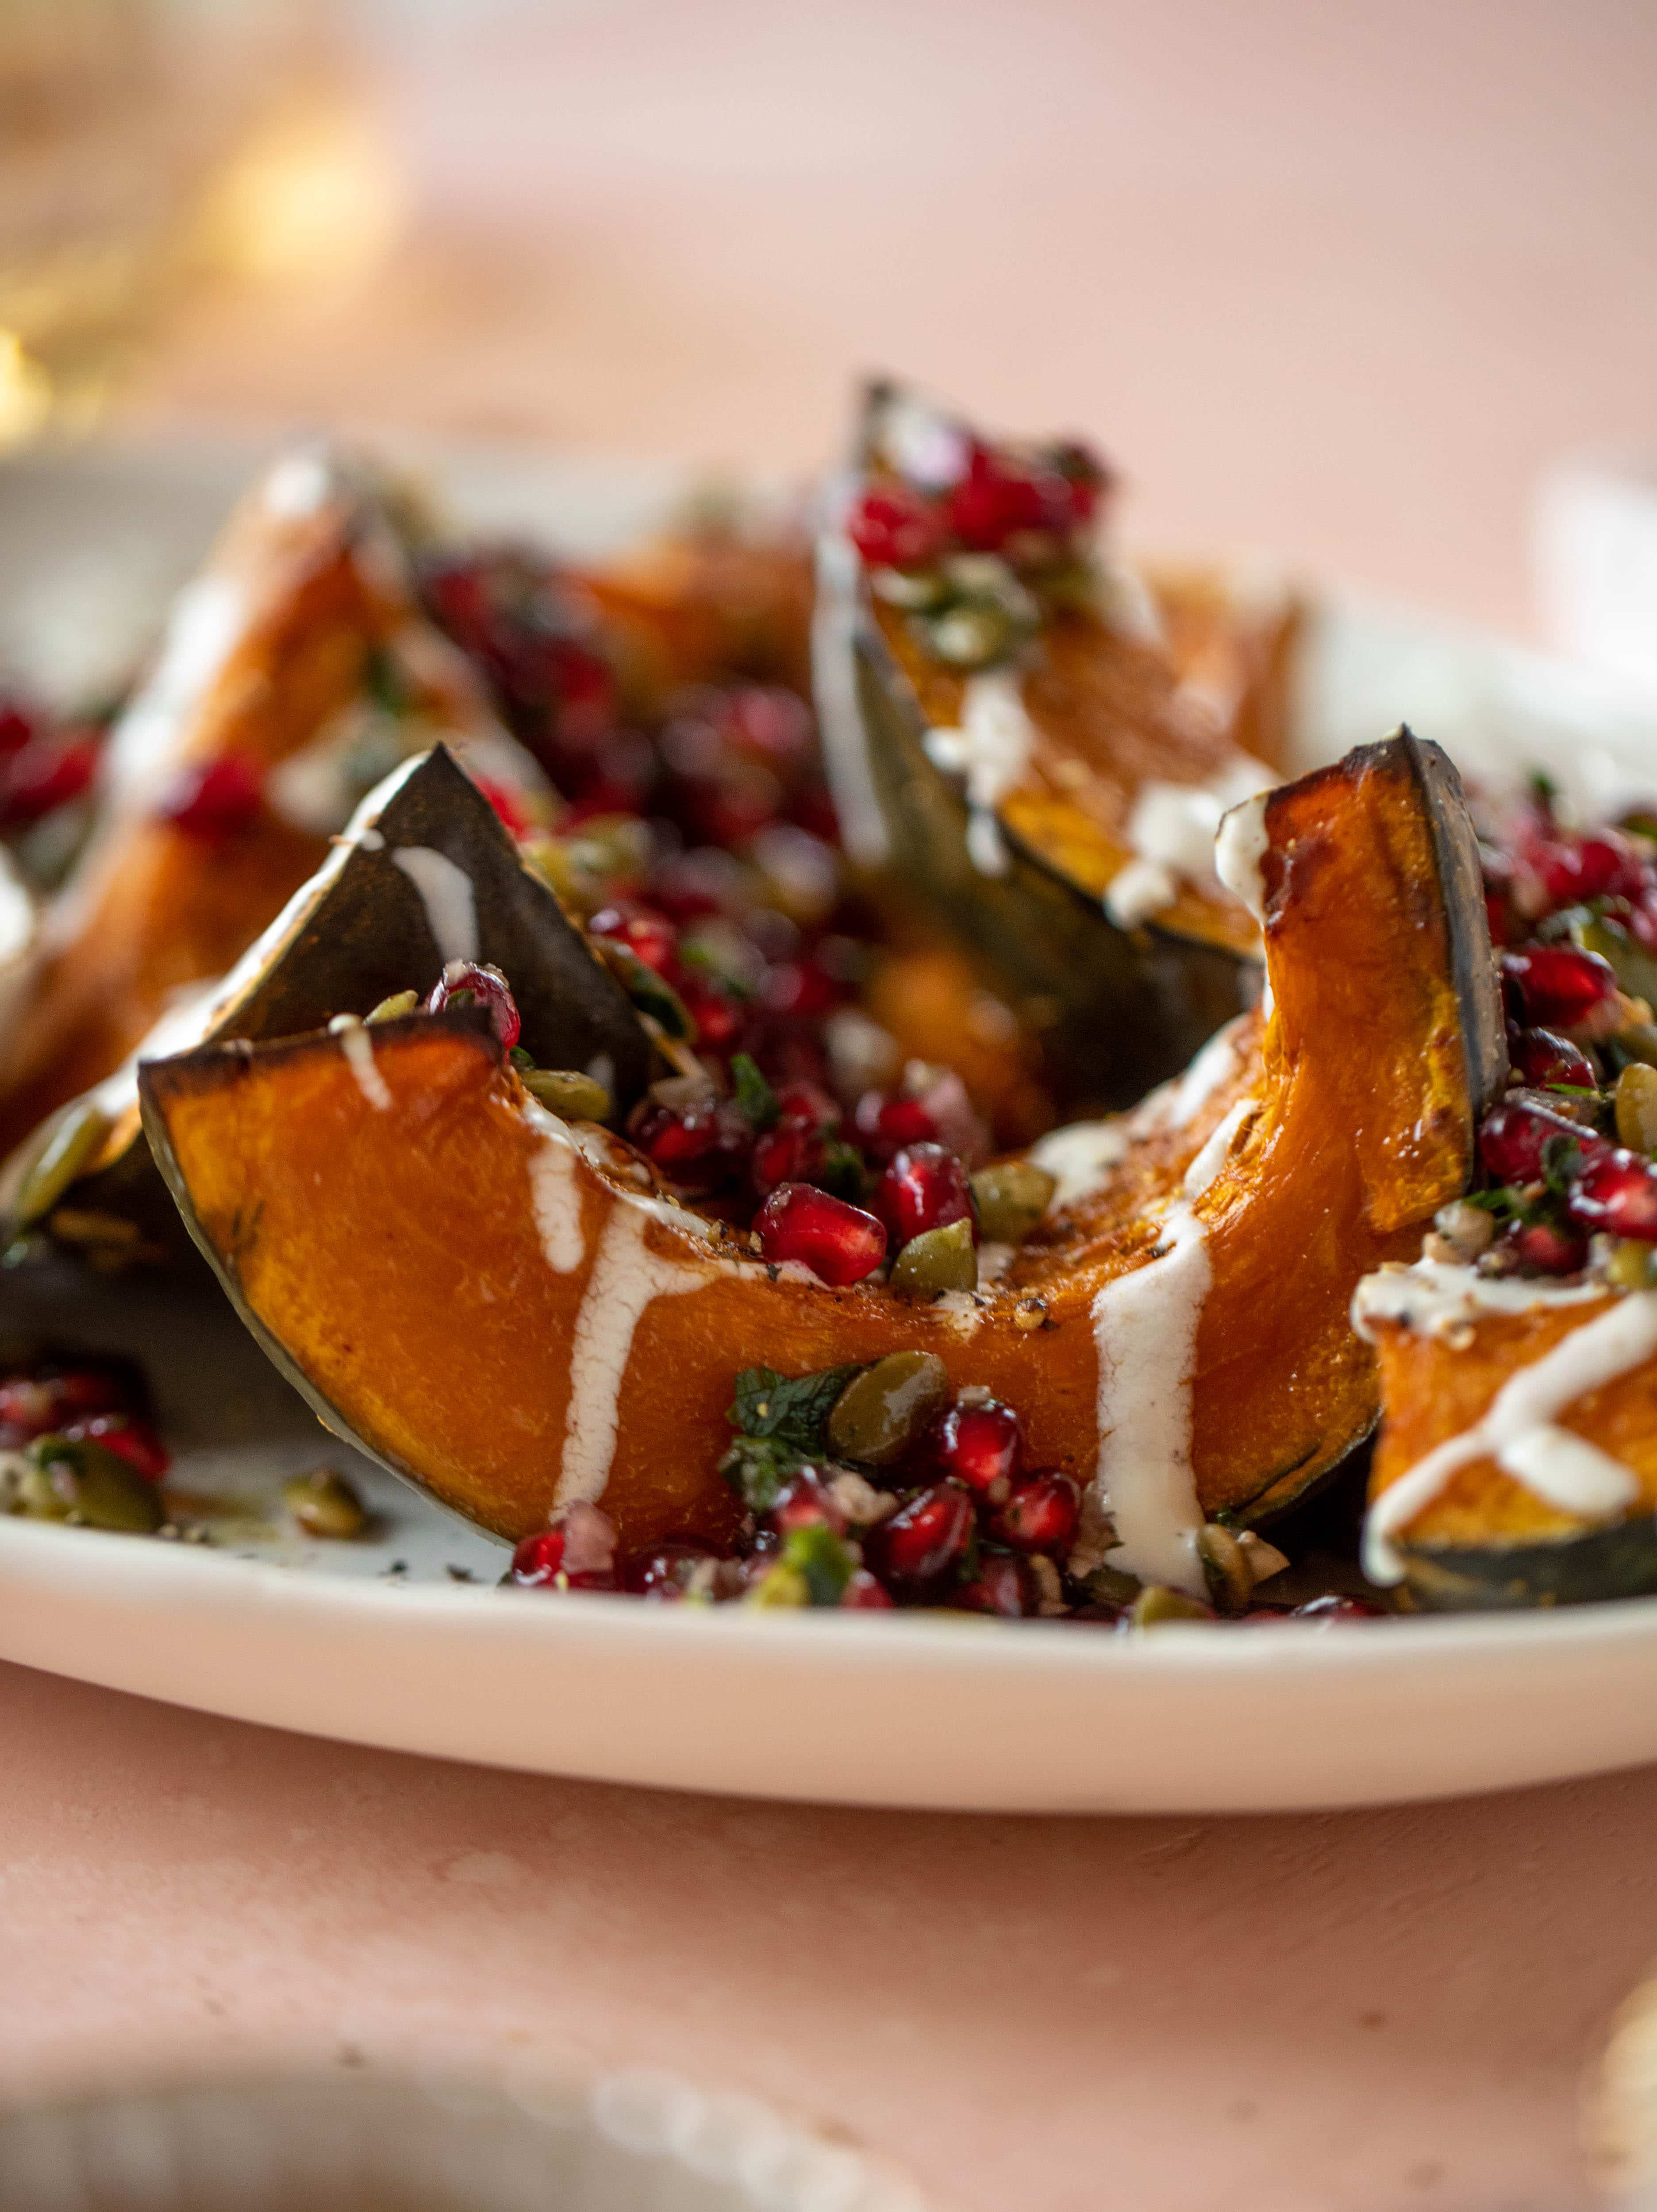 This roasted kabocha squash is caramely and naturally sweet, drizzled with whipped goat cheese and topped with pomegranate pepita relish. It's unreal!